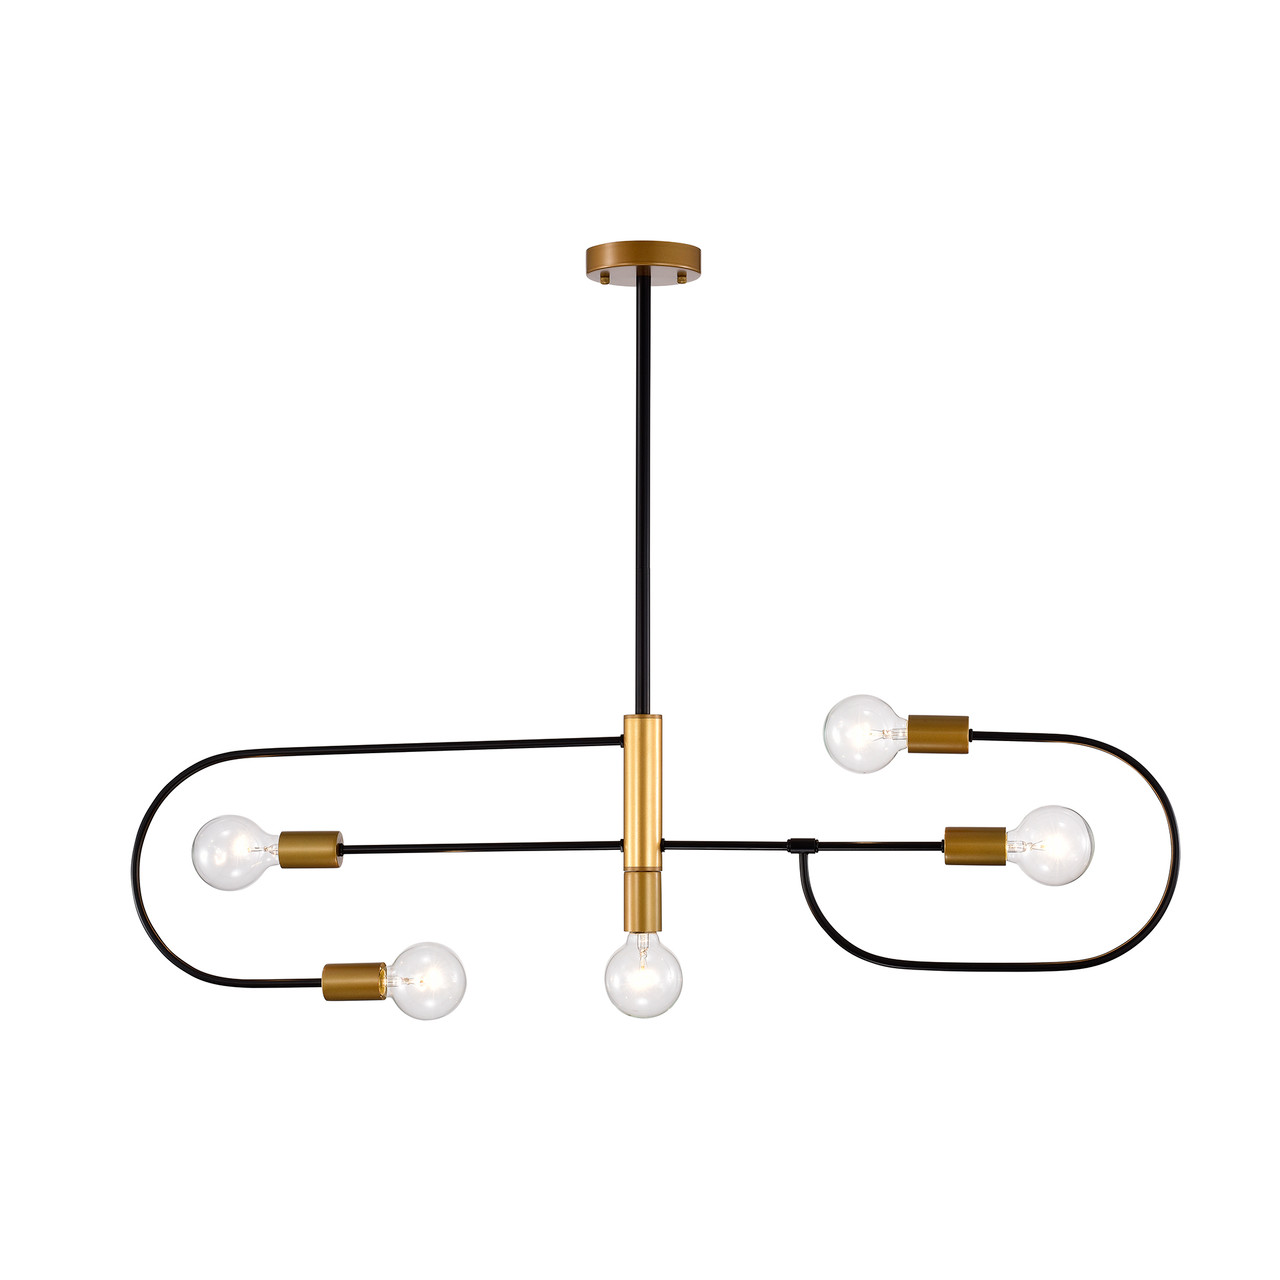 WAREHOUSE OF TIFFANY'S MD43/5MG Kohen 5 in. 5-Light Indoor Matte Black and Gold Finish Chandelier with Light Kit